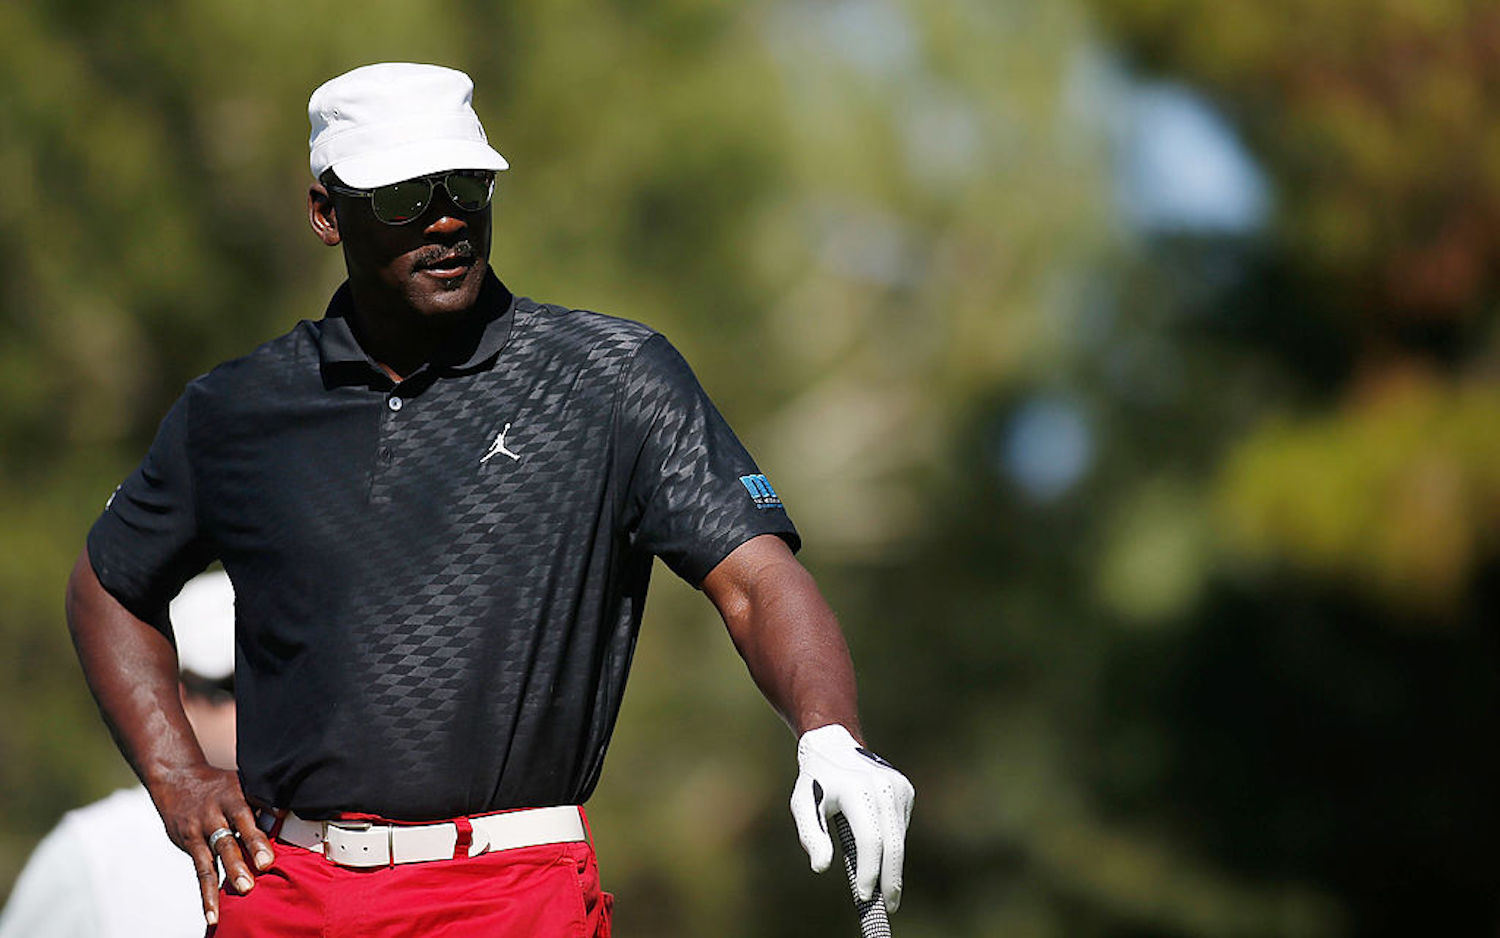 At Michael Jordan's private golf course, The Grove XXIII, you can get a beer delivered to you at any time via flying drone.